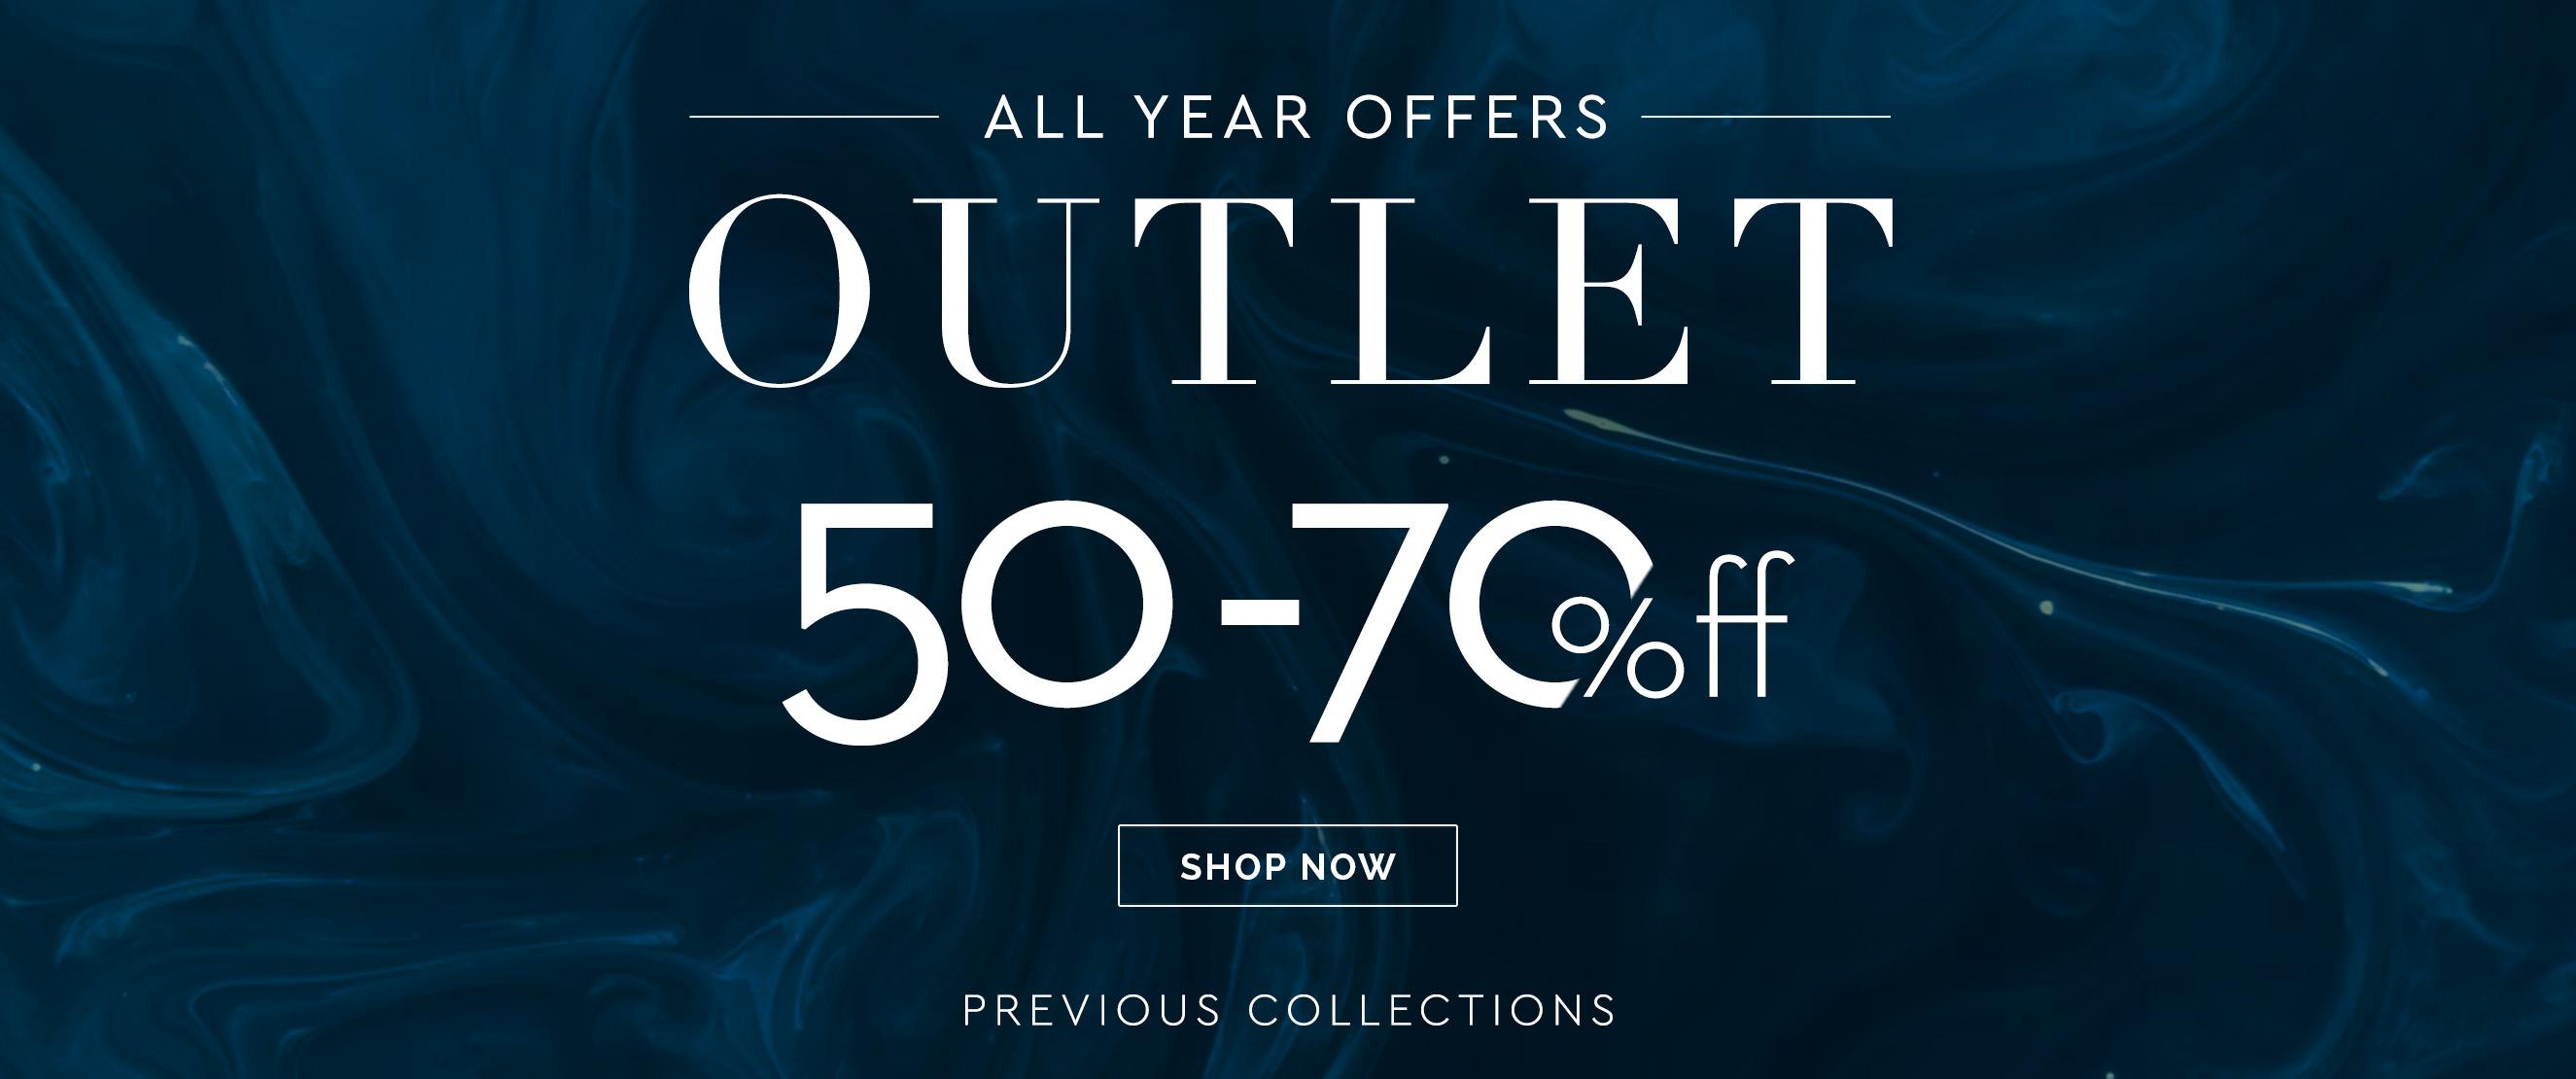 Outlet 50-70%